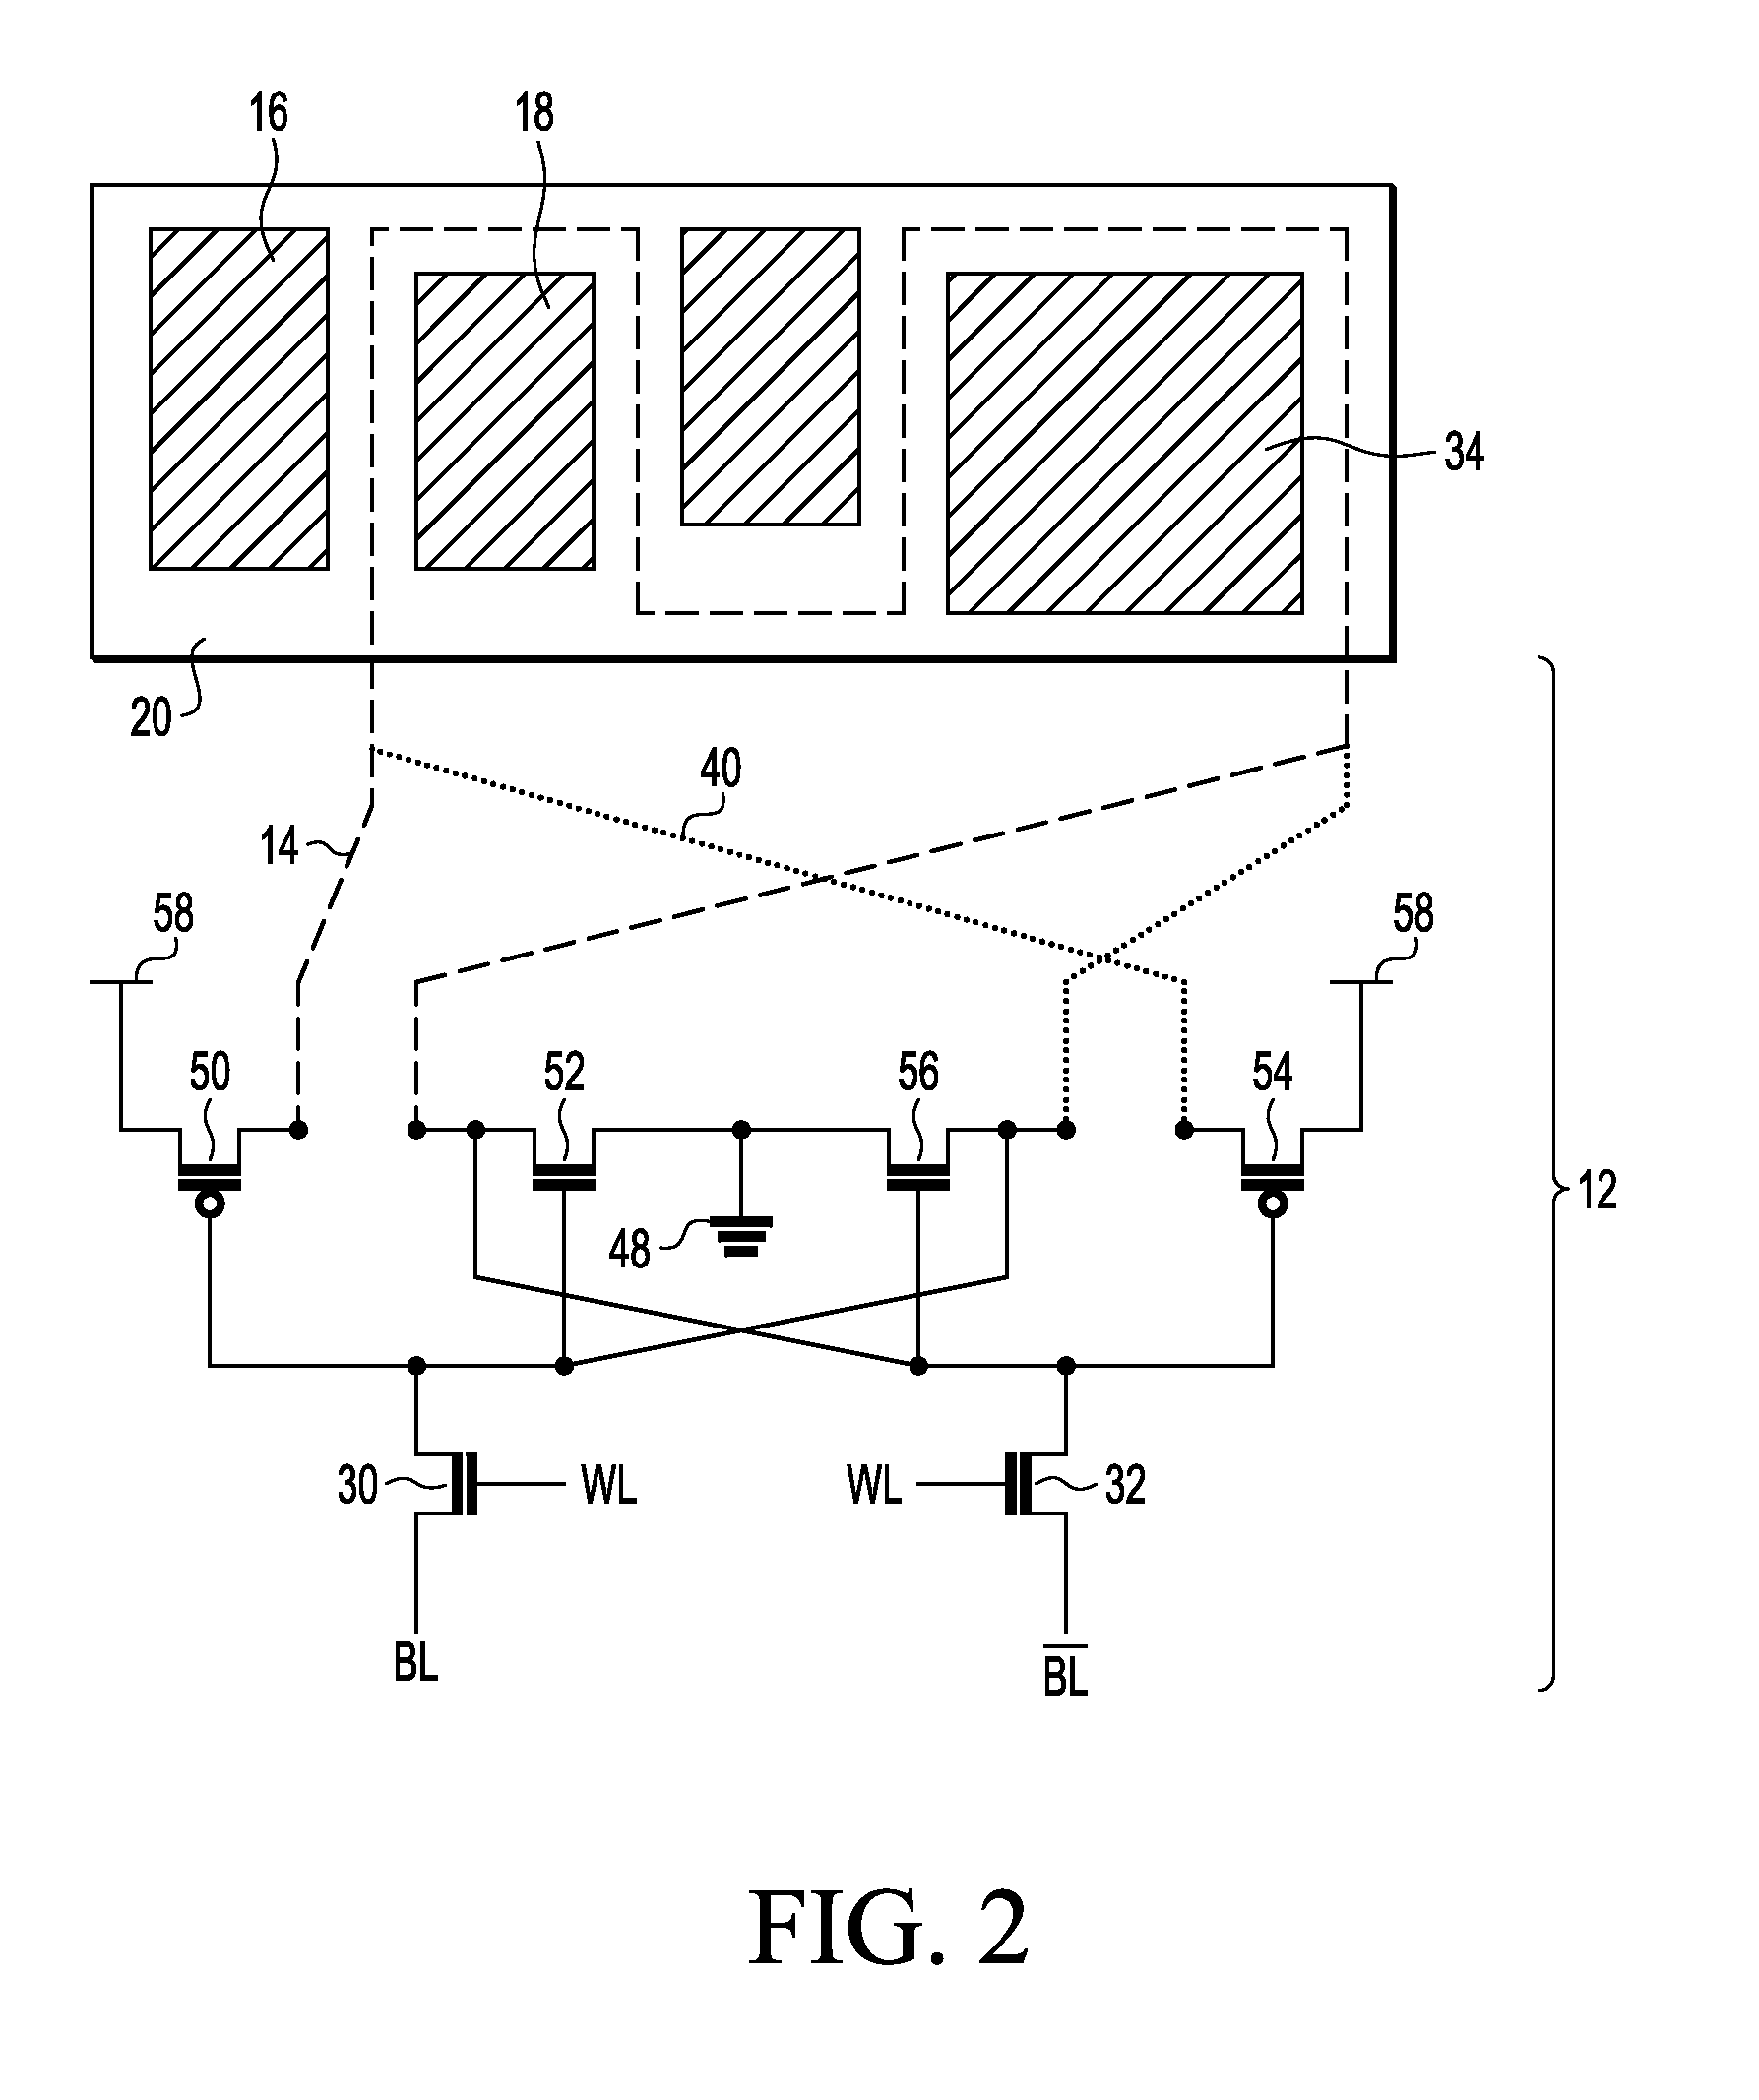 Chip damage detection device for a semiconductor integrated circuit